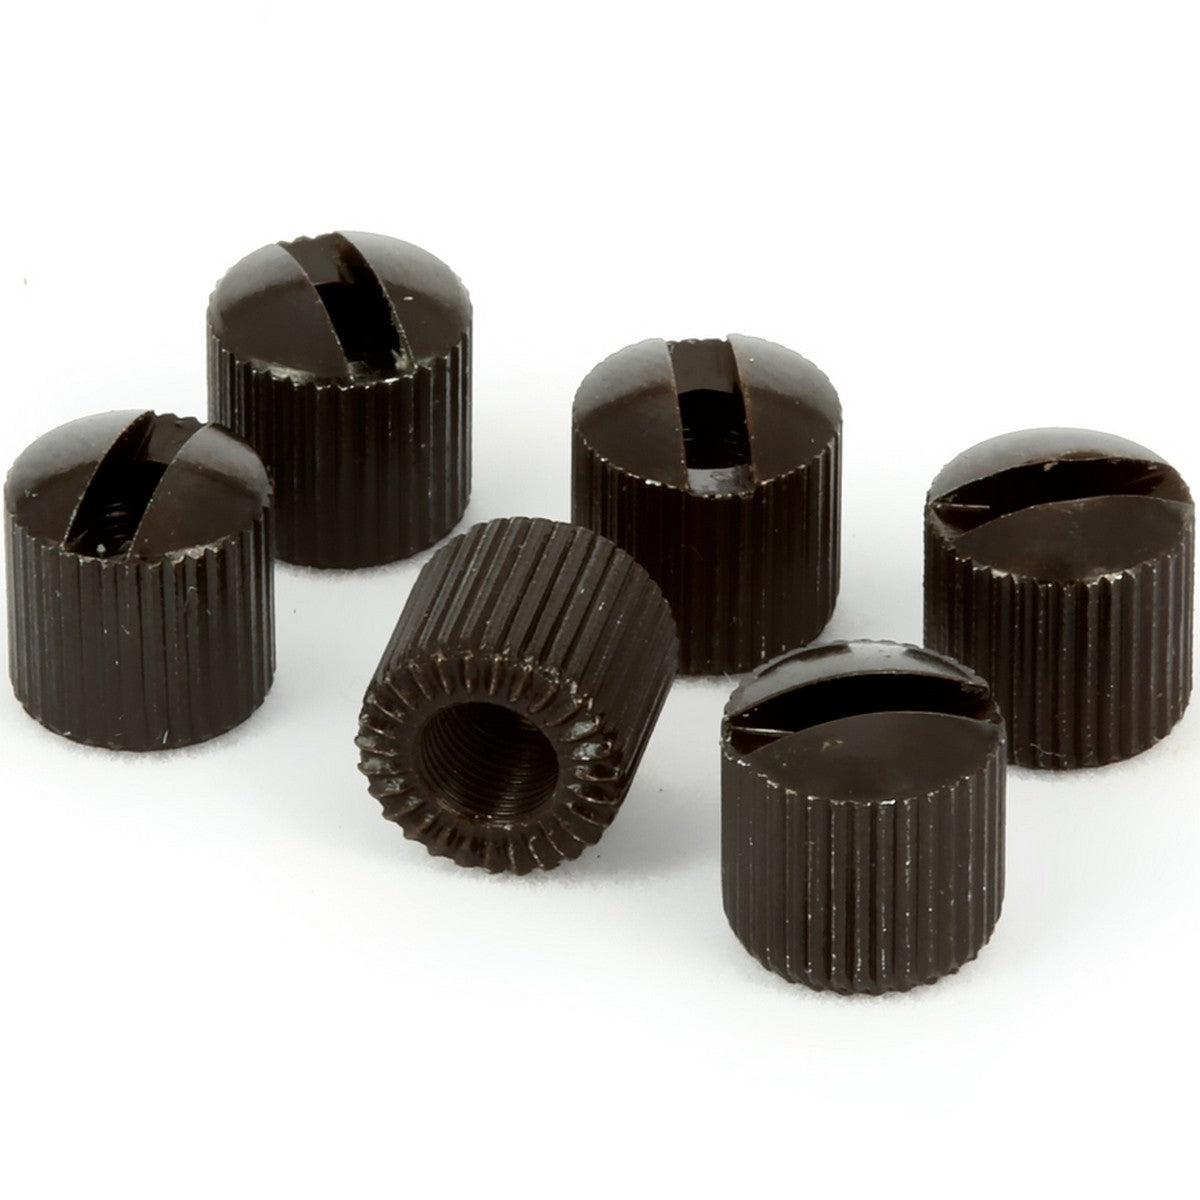 Tronical Lock Nuts | Nuts for TronicalTune RoboHeads Black Set of 6